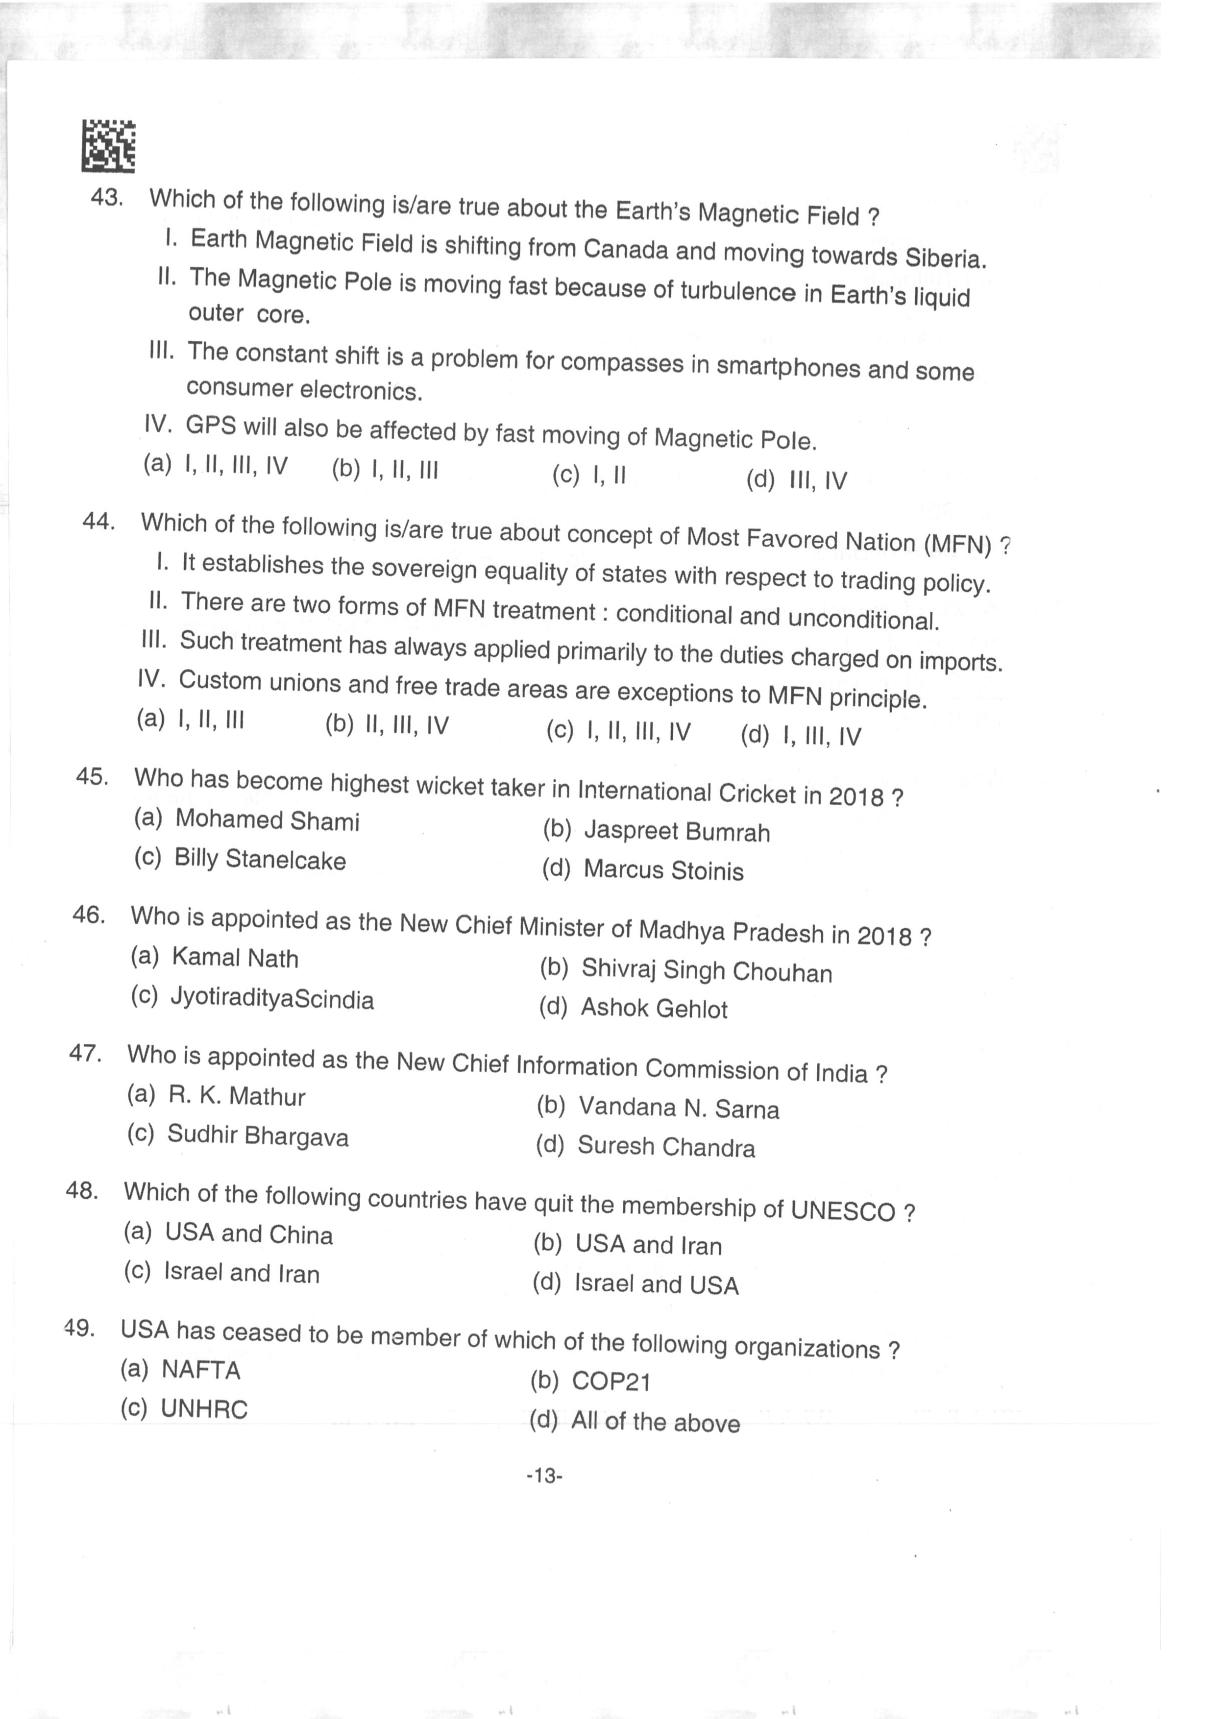 AILET 2019 Question Paper for BA LLB - Page 13